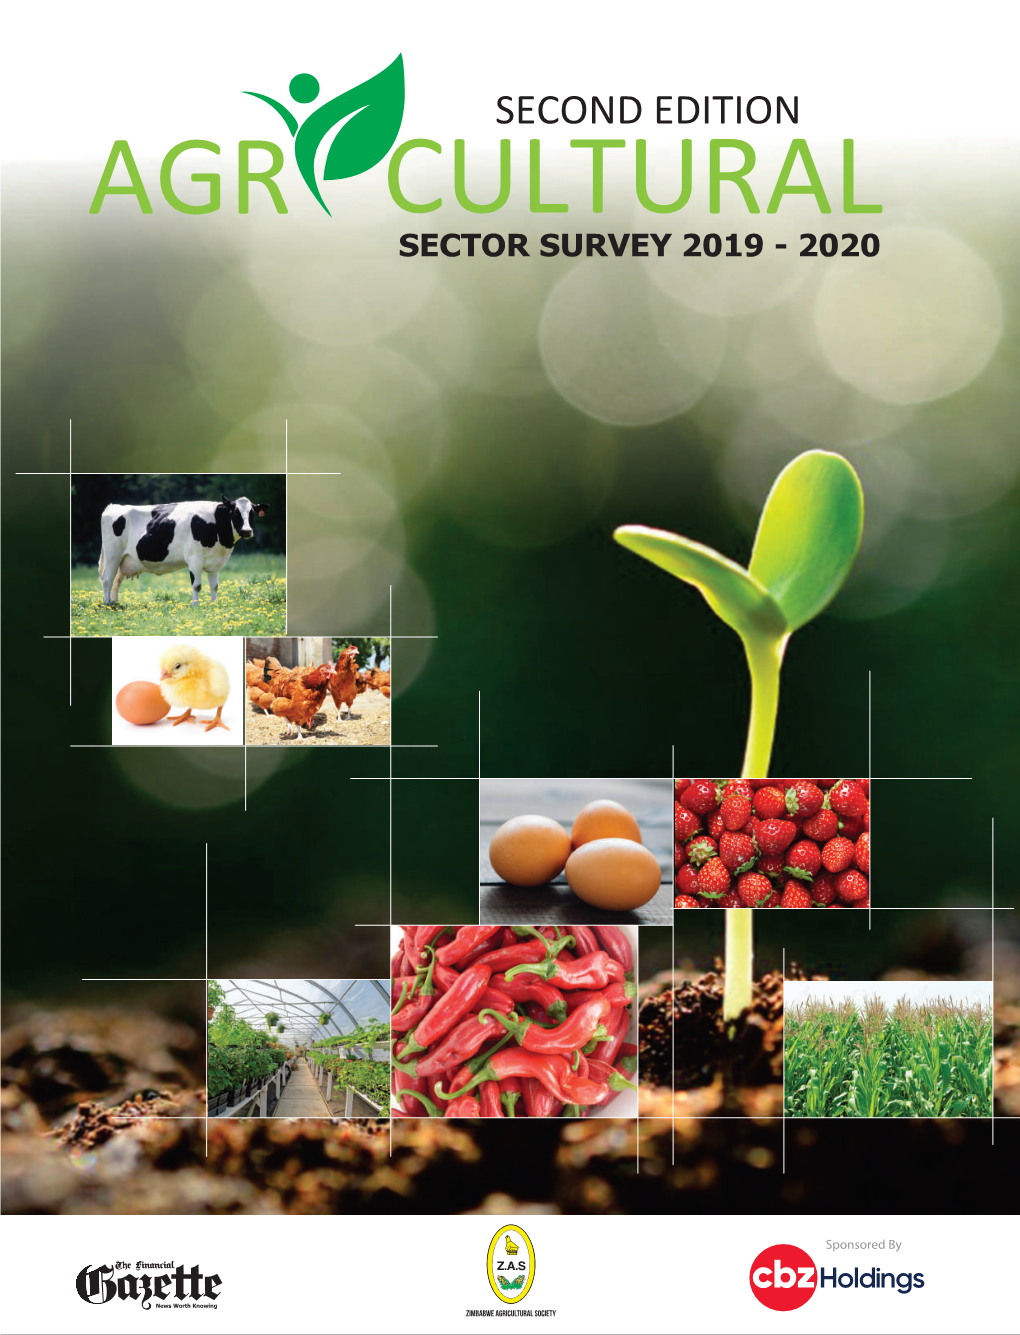 Second-Edition-Agricultural-Sector-Survey-2019-2020.Pdf